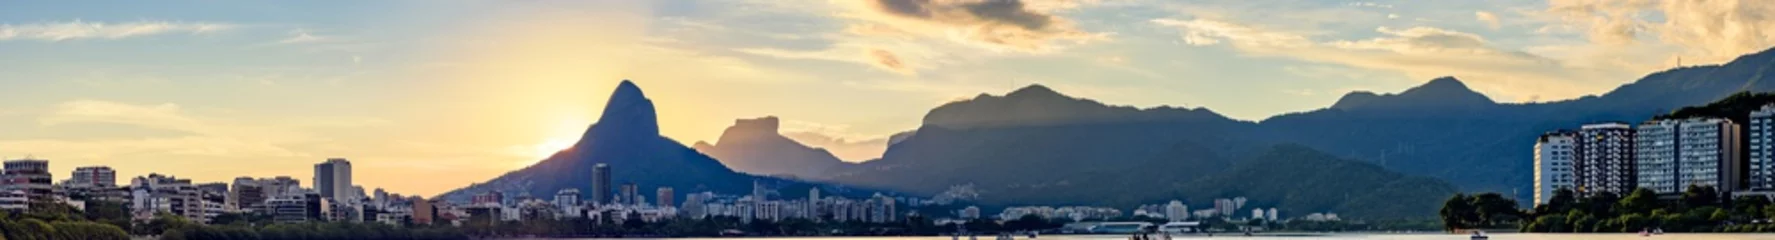 Wallpaper murals Rio de Janeiro Panoramic image of the first summer sunset of the year 2018 seen from the lagoon Rodrigo de Freitas with the buildings of the city of Rio de Janeiro, hill Dois IrmÃ£os and Gavea stone